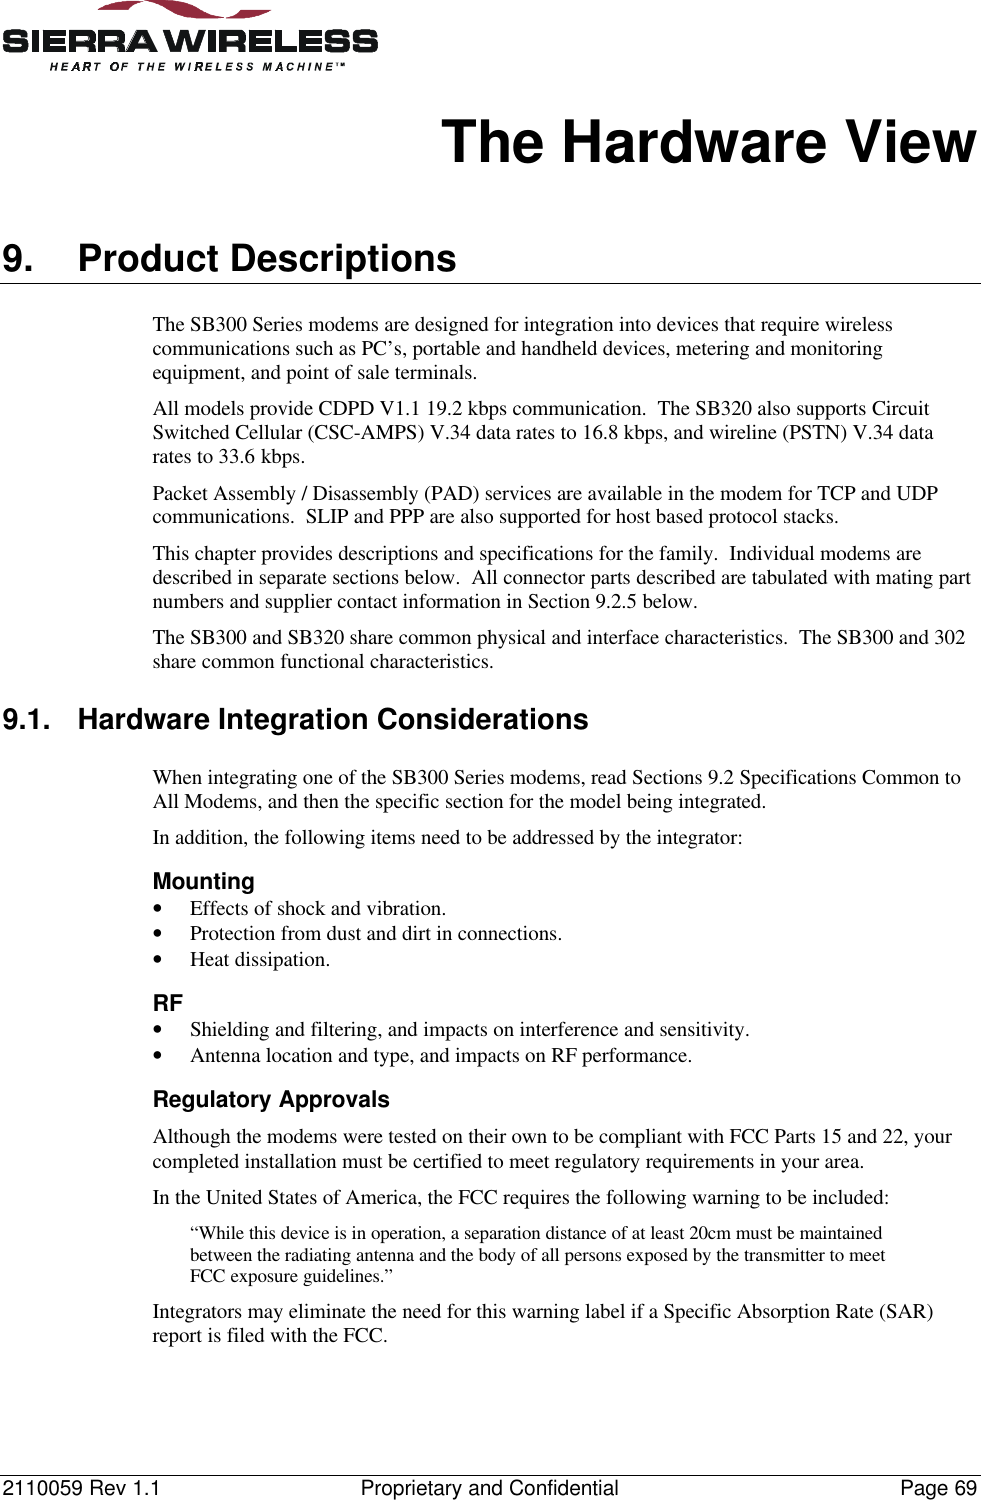 2110059 Rev 1.1 Proprietary and Confidential Page 69The Hardware View9. Product DescriptionsThe SB300 Series modems are designed for integration into devices that require wirelesscommunications such as PC’s, portable and handheld devices, metering and monitoringequipment, and point of sale terminals.All models provide CDPD V1.1 19.2 kbps communication.  The SB320 also supports CircuitSwitched Cellular (CSC-AMPS) V.34 data rates to 16.8 kbps, and wireline (PSTN) V.34 datarates to 33.6 kbps.Packet Assembly / Disassembly (PAD) services are available in the modem for TCP and UDPcommunications.  SLIP and PPP are also supported for host based protocol stacks.This chapter provides descriptions and specifications for the family.  Individual modems aredescribed in separate sections below.  All connector parts described are tabulated with mating partnumbers and supplier contact information in Section 9.2.5 below.The SB300 and SB320 share common physical and interface characteristics.  The SB300 and 302share common functional characteristics.9.1. Hardware Integration ConsiderationsWhen integrating one of the SB300 Series modems, read Sections 9.2 Specifications Common toAll Modems, and then the specific section for the model being integrated.In addition, the following items need to be addressed by the integrator:Mounting• Effects of shock and vibration.• Protection from dust and dirt in connections.• Heat dissipation.RF• Shielding and filtering, and impacts on interference and sensitivity.• Antenna location and type, and impacts on RF performance.Regulatory ApprovalsAlthough the modems were tested on their own to be compliant with FCC Parts 15 and 22, yourcompleted installation must be certified to meet regulatory requirements in your area.In the United States of America, the FCC requires the following warning to be included:“While this device is in operation, a separation distance of at least 20cm must be maintainedbetween the radiating antenna and the body of all persons exposed by the transmitter to meetFCC exposure guidelines.”Integrators may eliminate the need for this warning label if a Specific Absorption Rate (SAR)report is filed with the FCC.